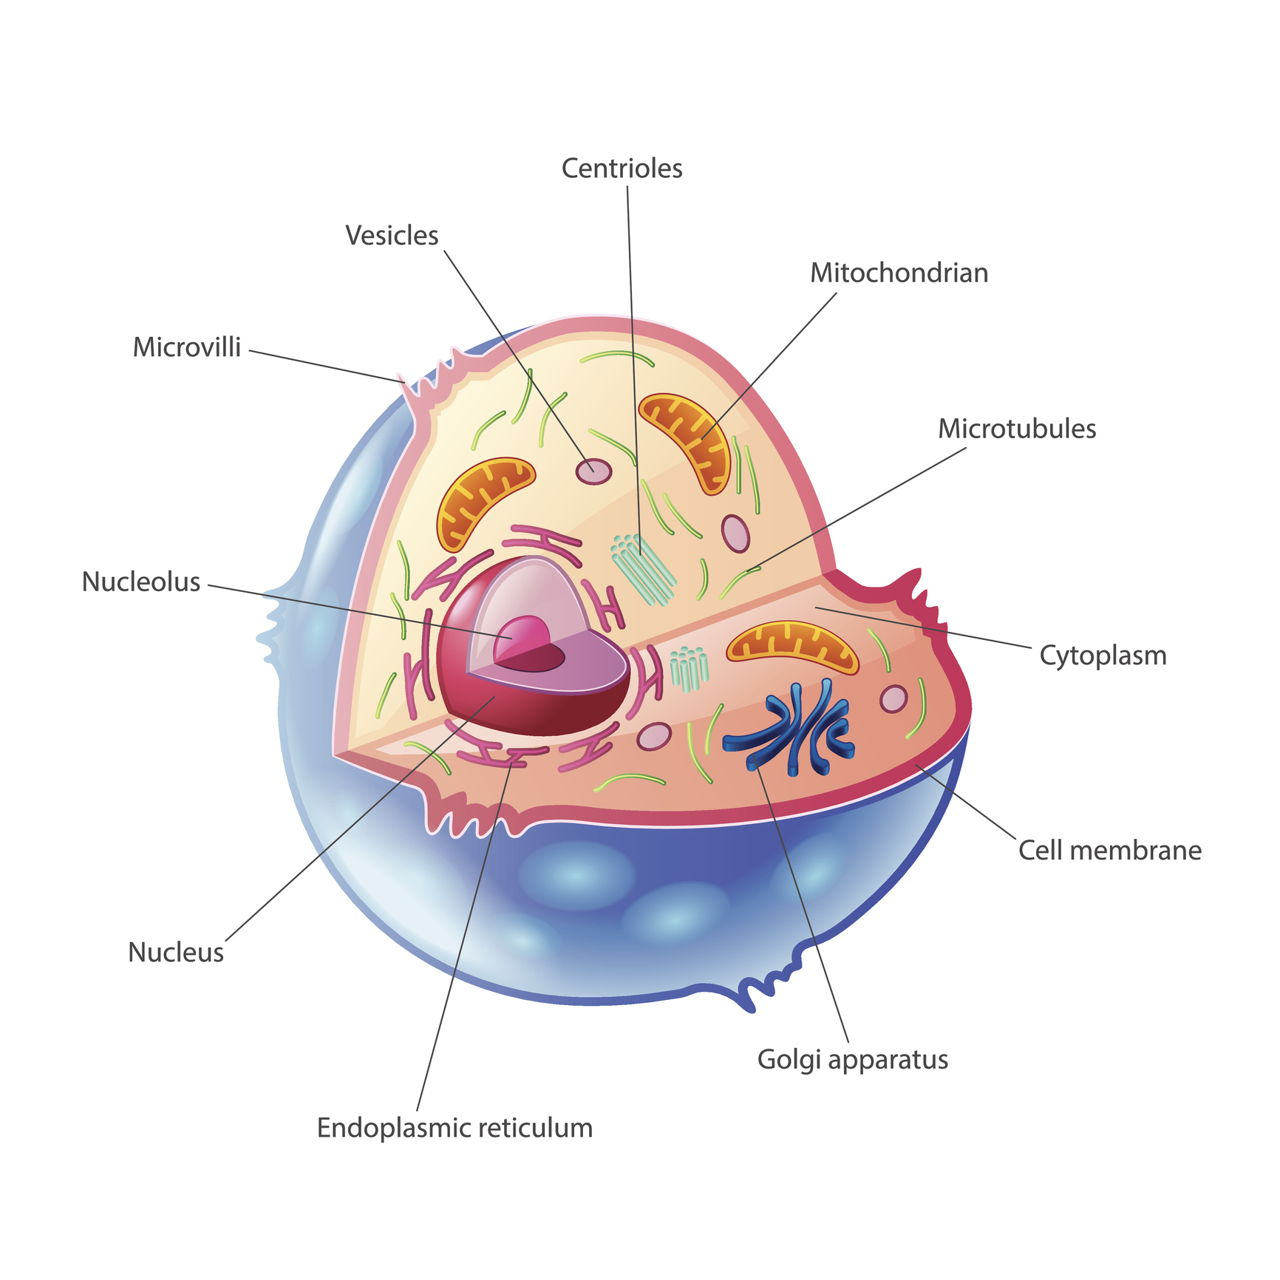 Animal Cell Diagram A Quick Guide To The Structure And Functions Of The Animal Cell